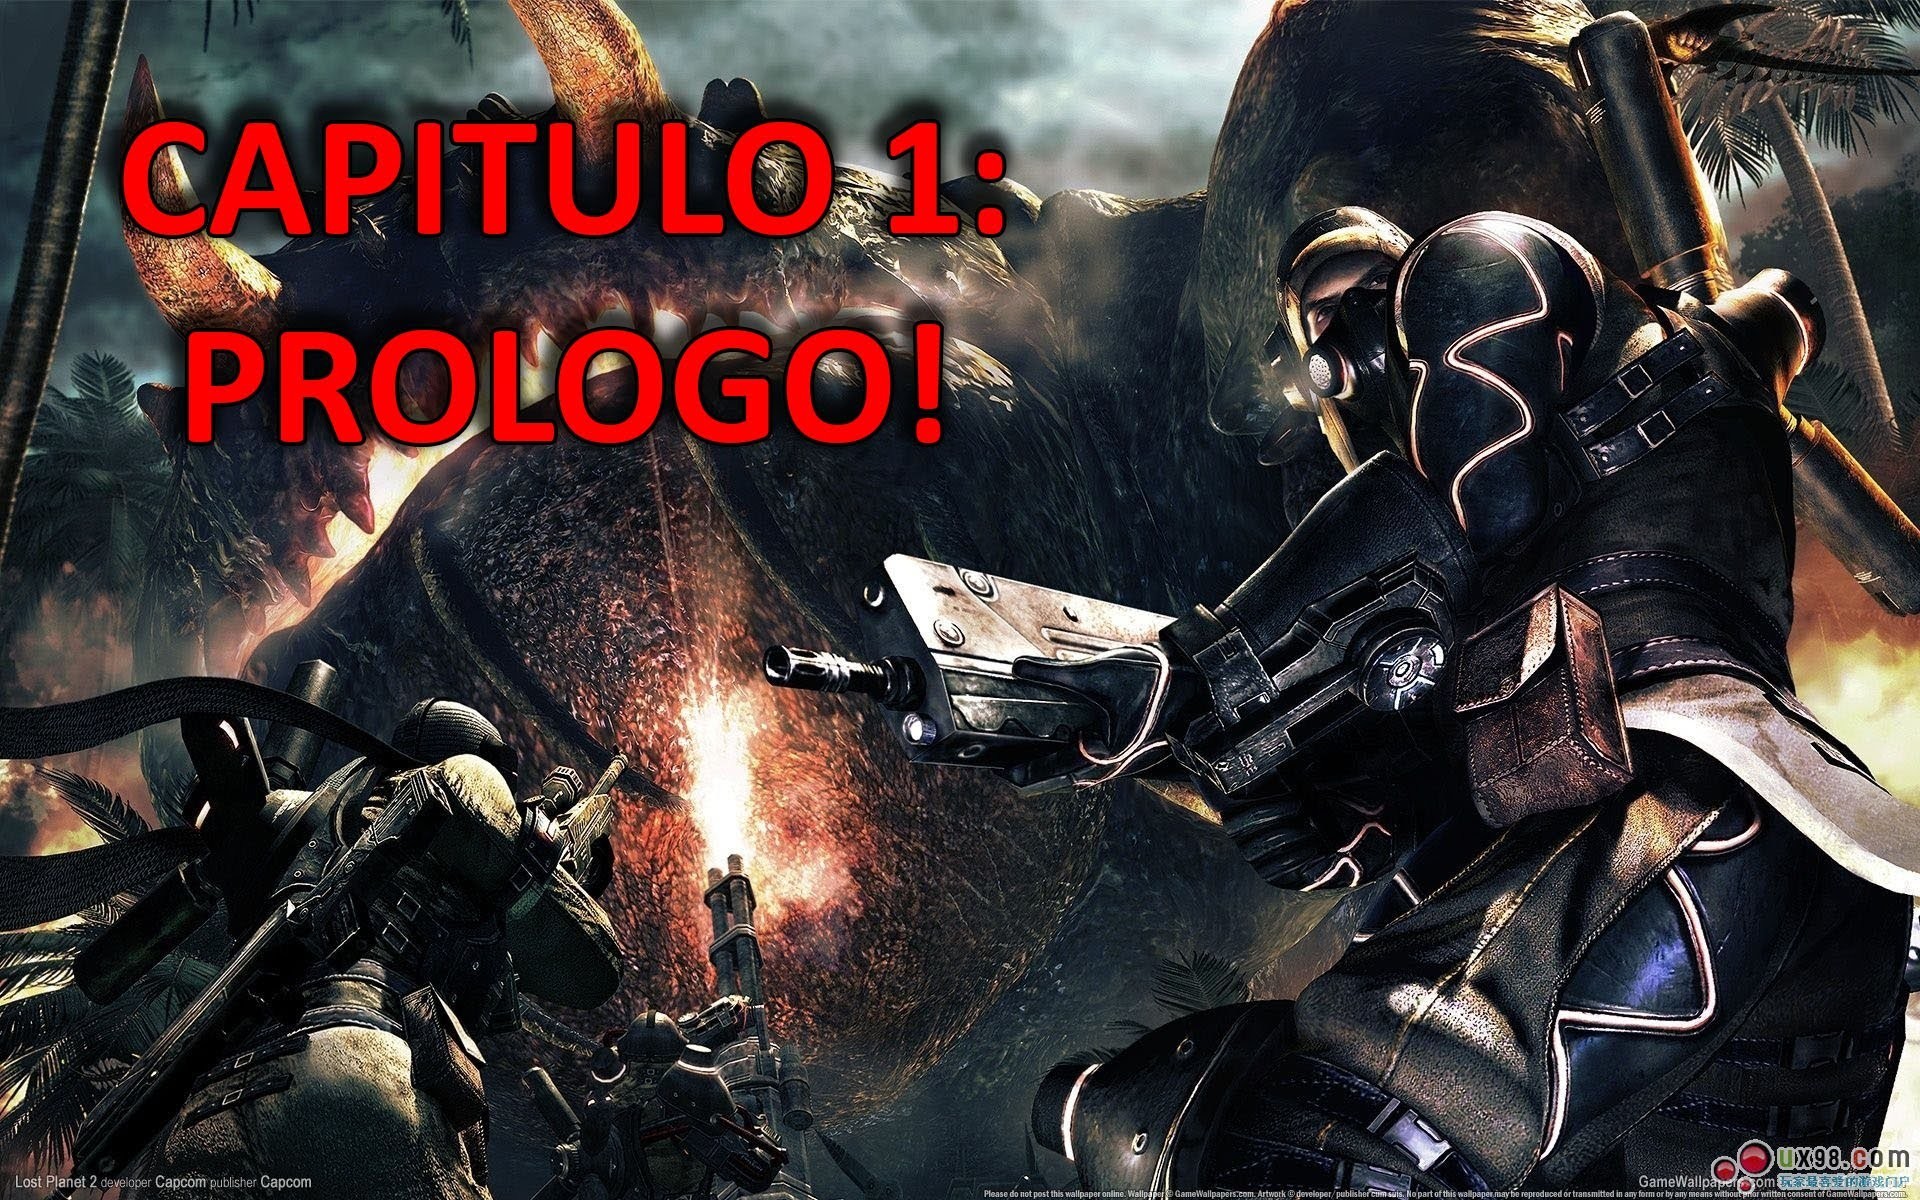 Lost Planet 2 Capitulo 1 Prologo 1920x1200